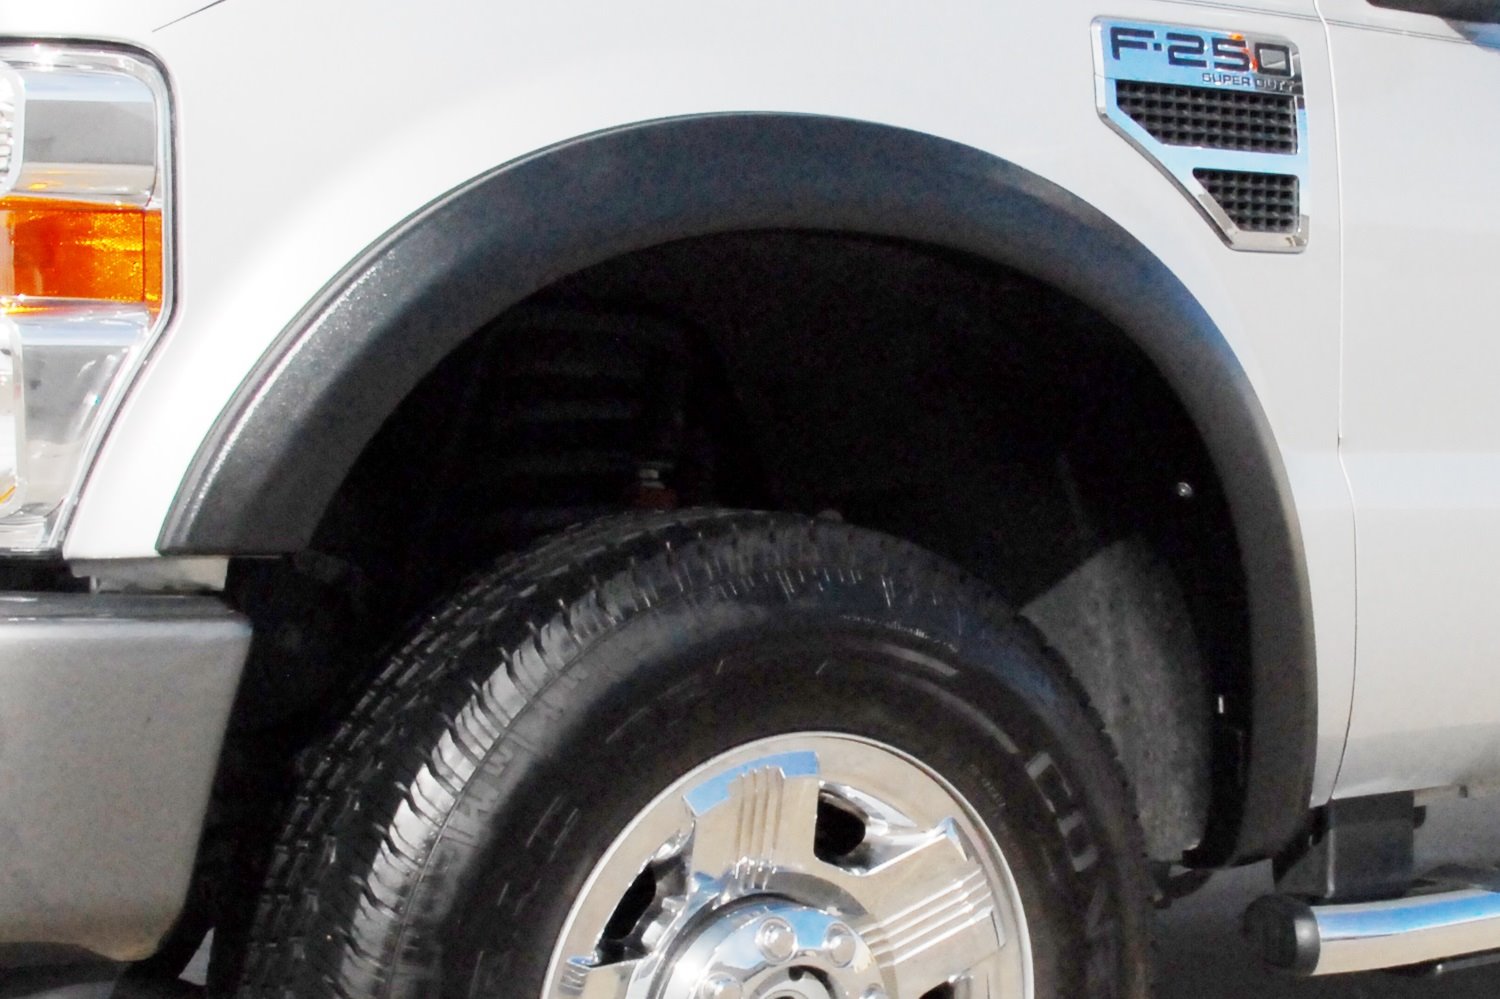 SX Sport-Style Fender Flares 2008-10 Ford F-Series Super